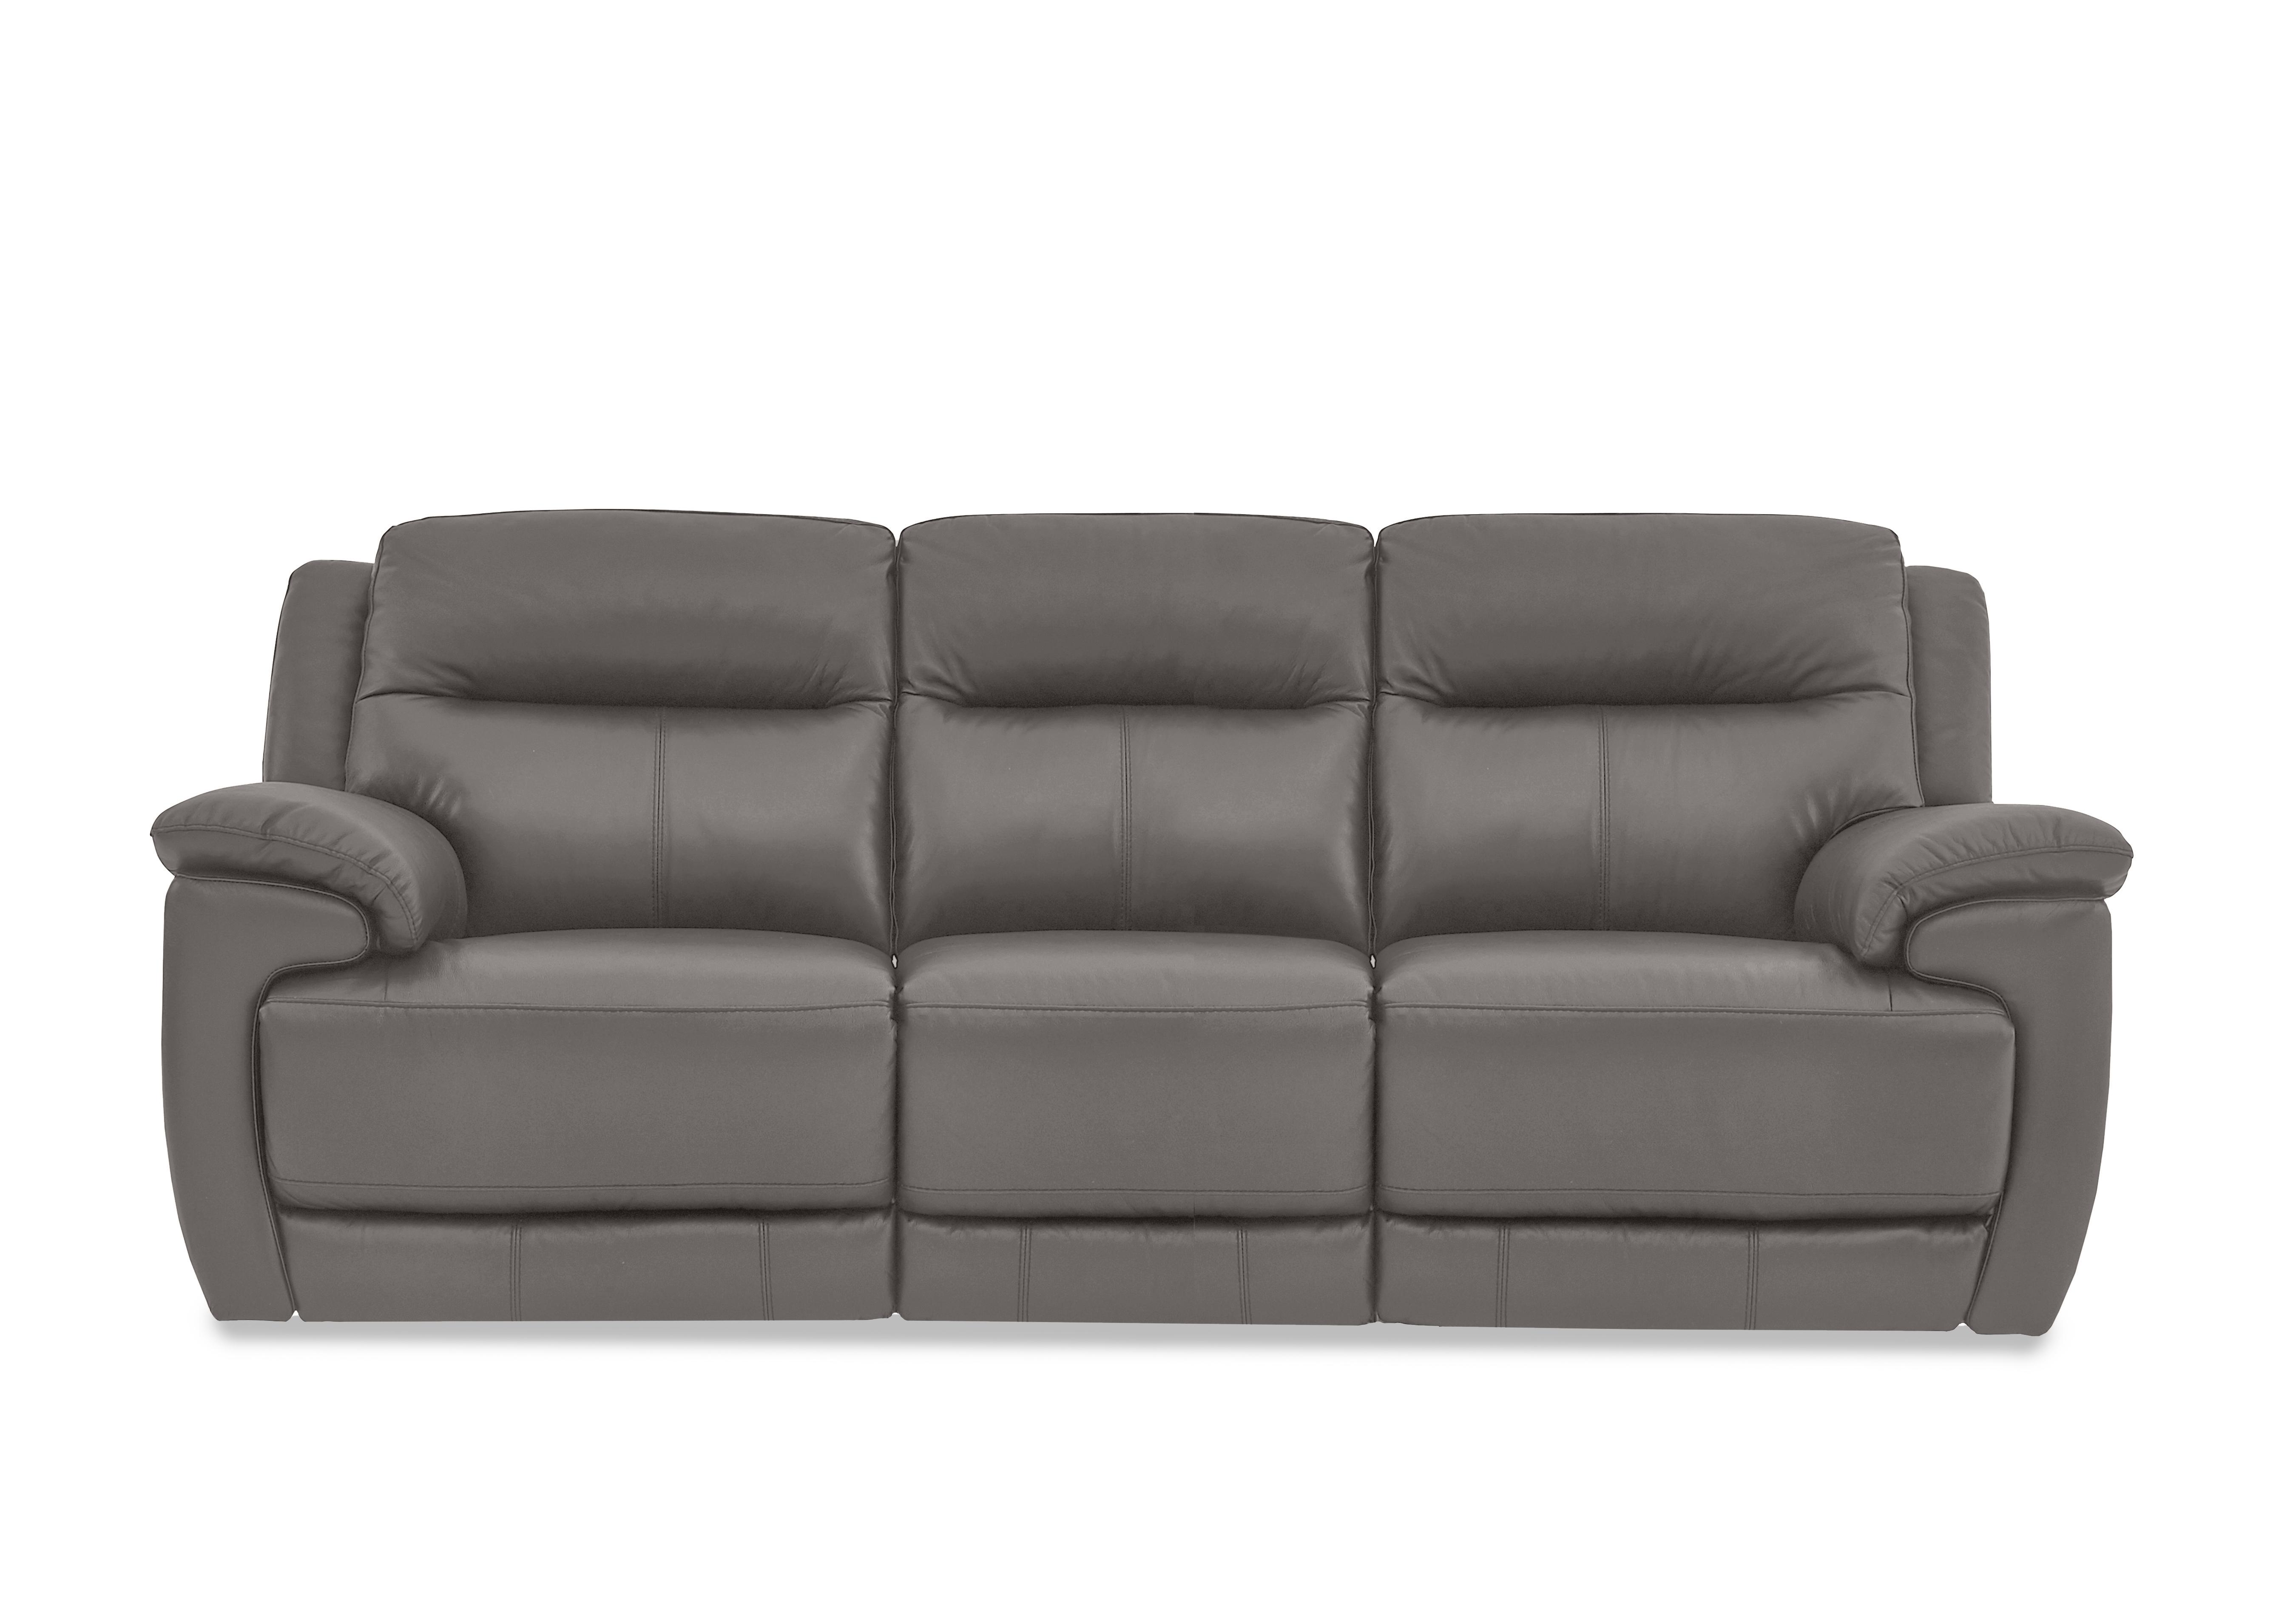 Touch 3 Seater Leather Sofa in Bv-042e Elephant on Furniture Village